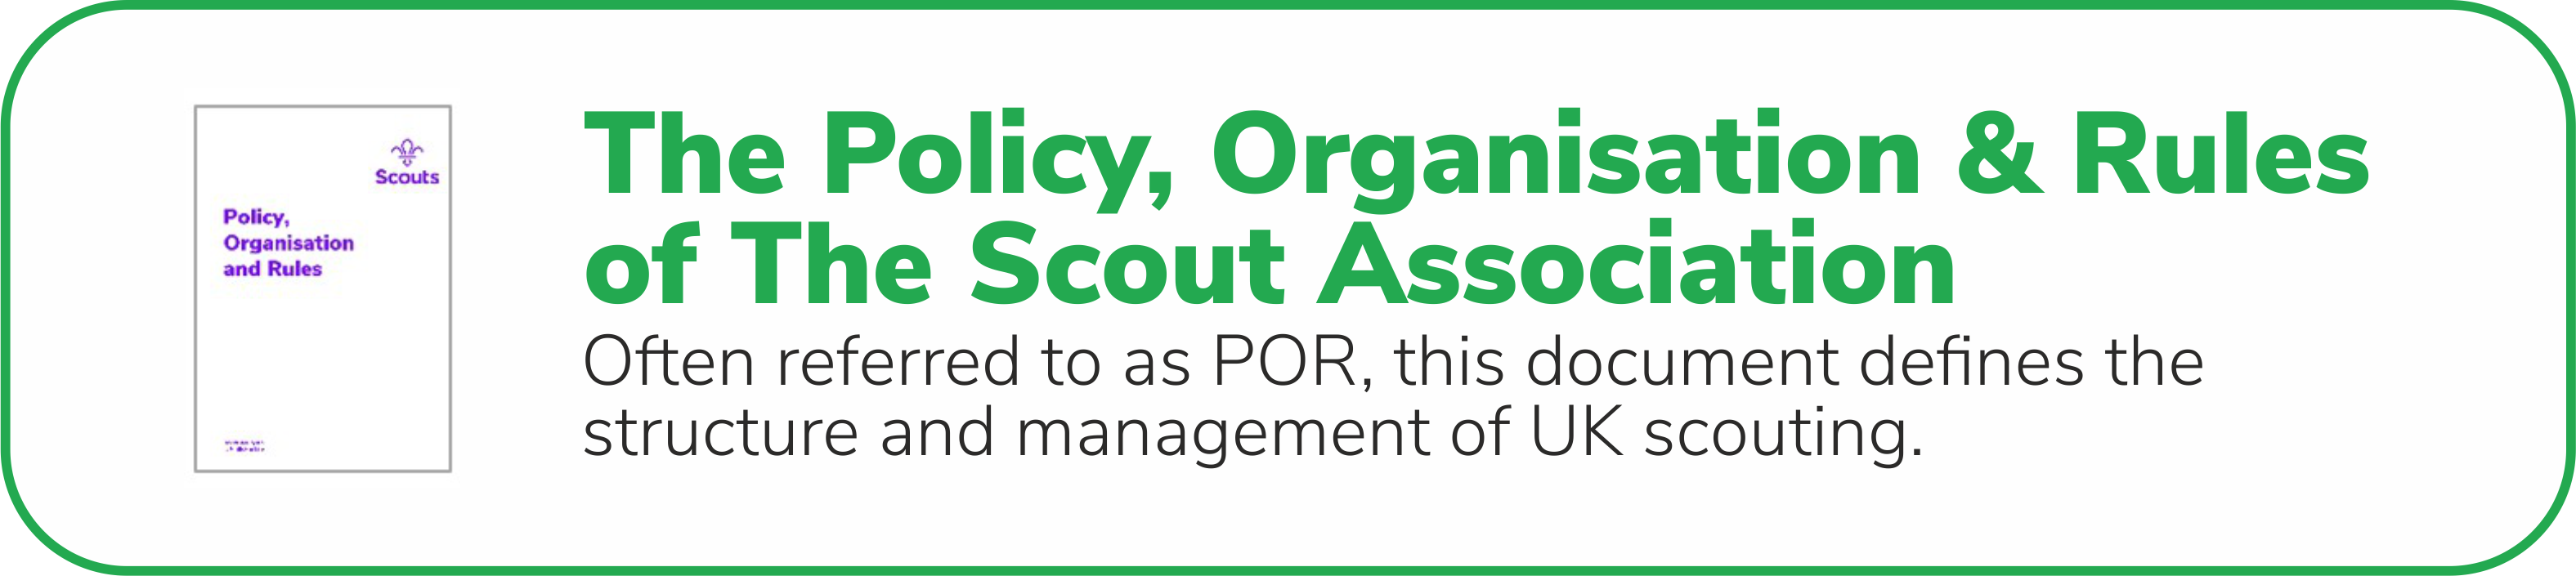 The Policy, Organisation and Rules of The Scout Association